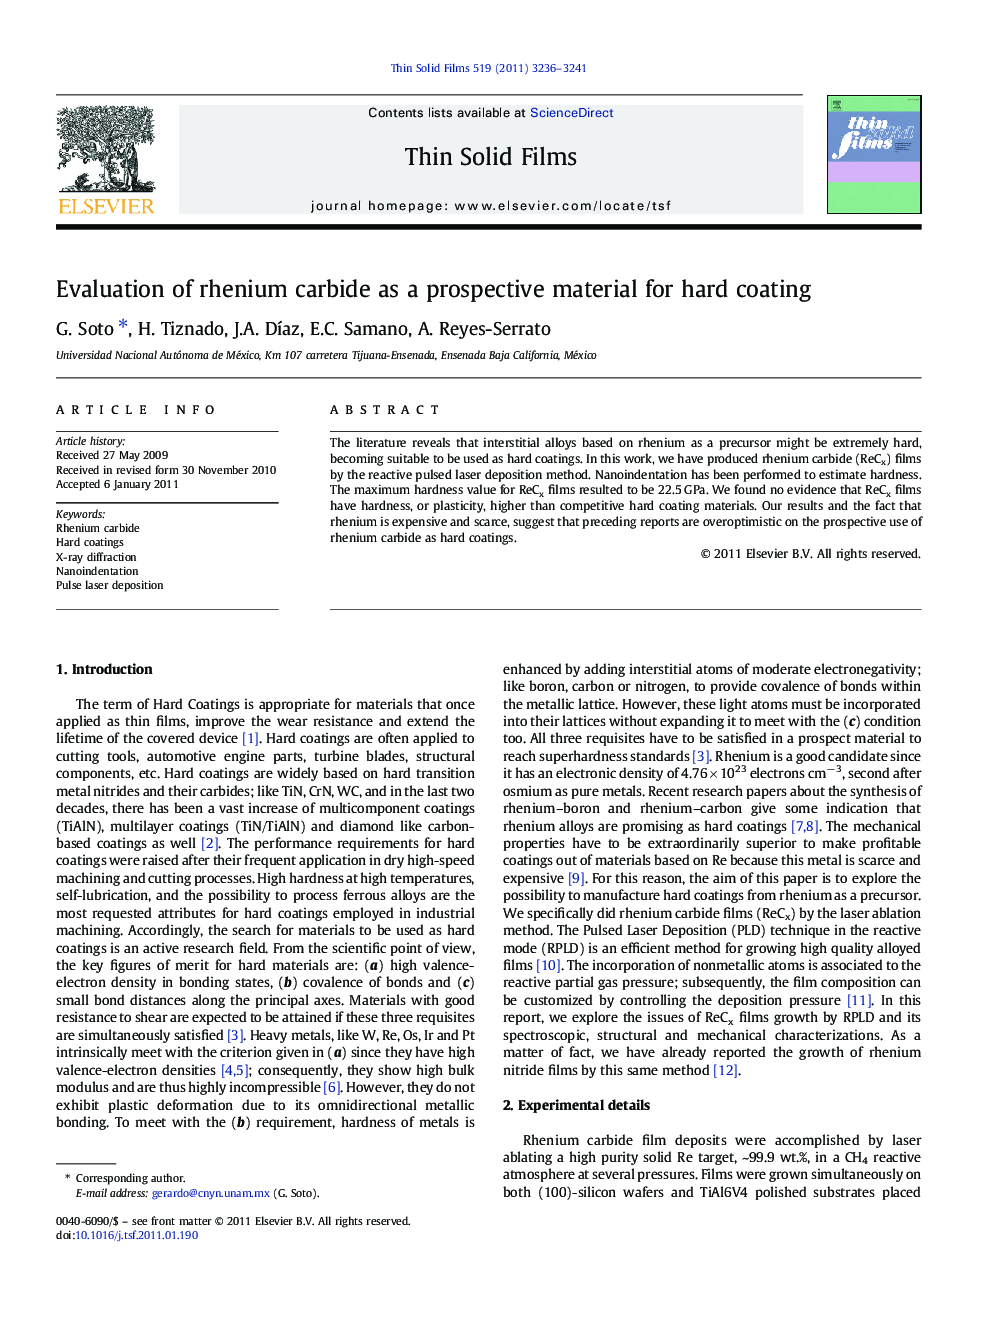 Evaluation of rhenium carbide as a prospective material for hard coating